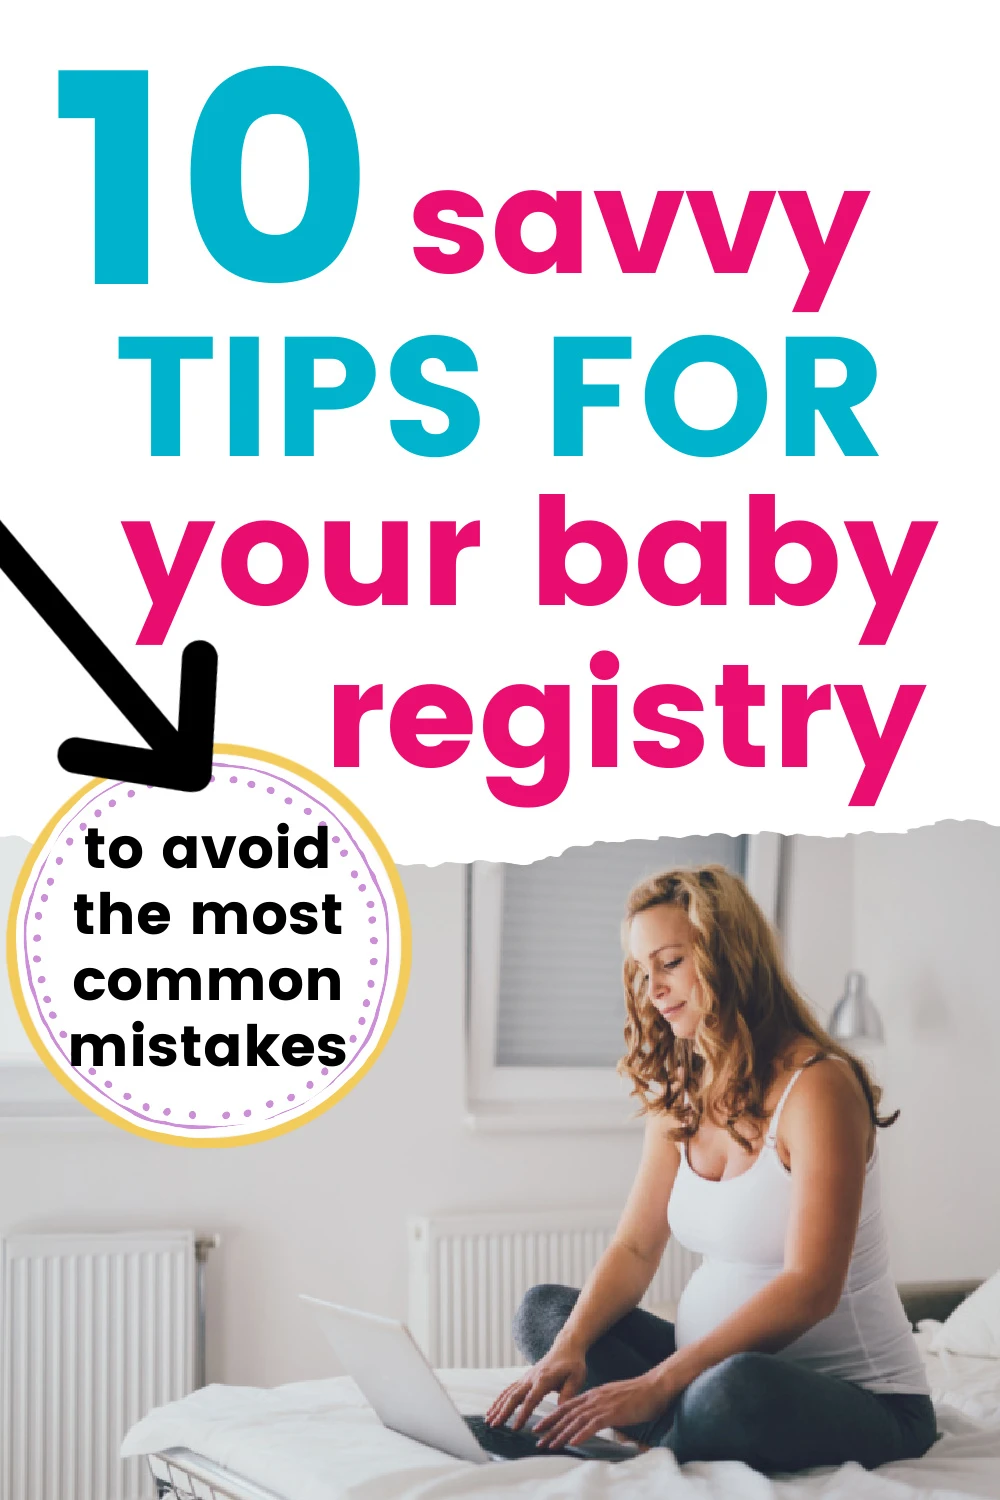 photo of pregnant woman on a bed with a laptop, text overly "10 savvy tips for your baby registry - to avoid the most common mistakes"